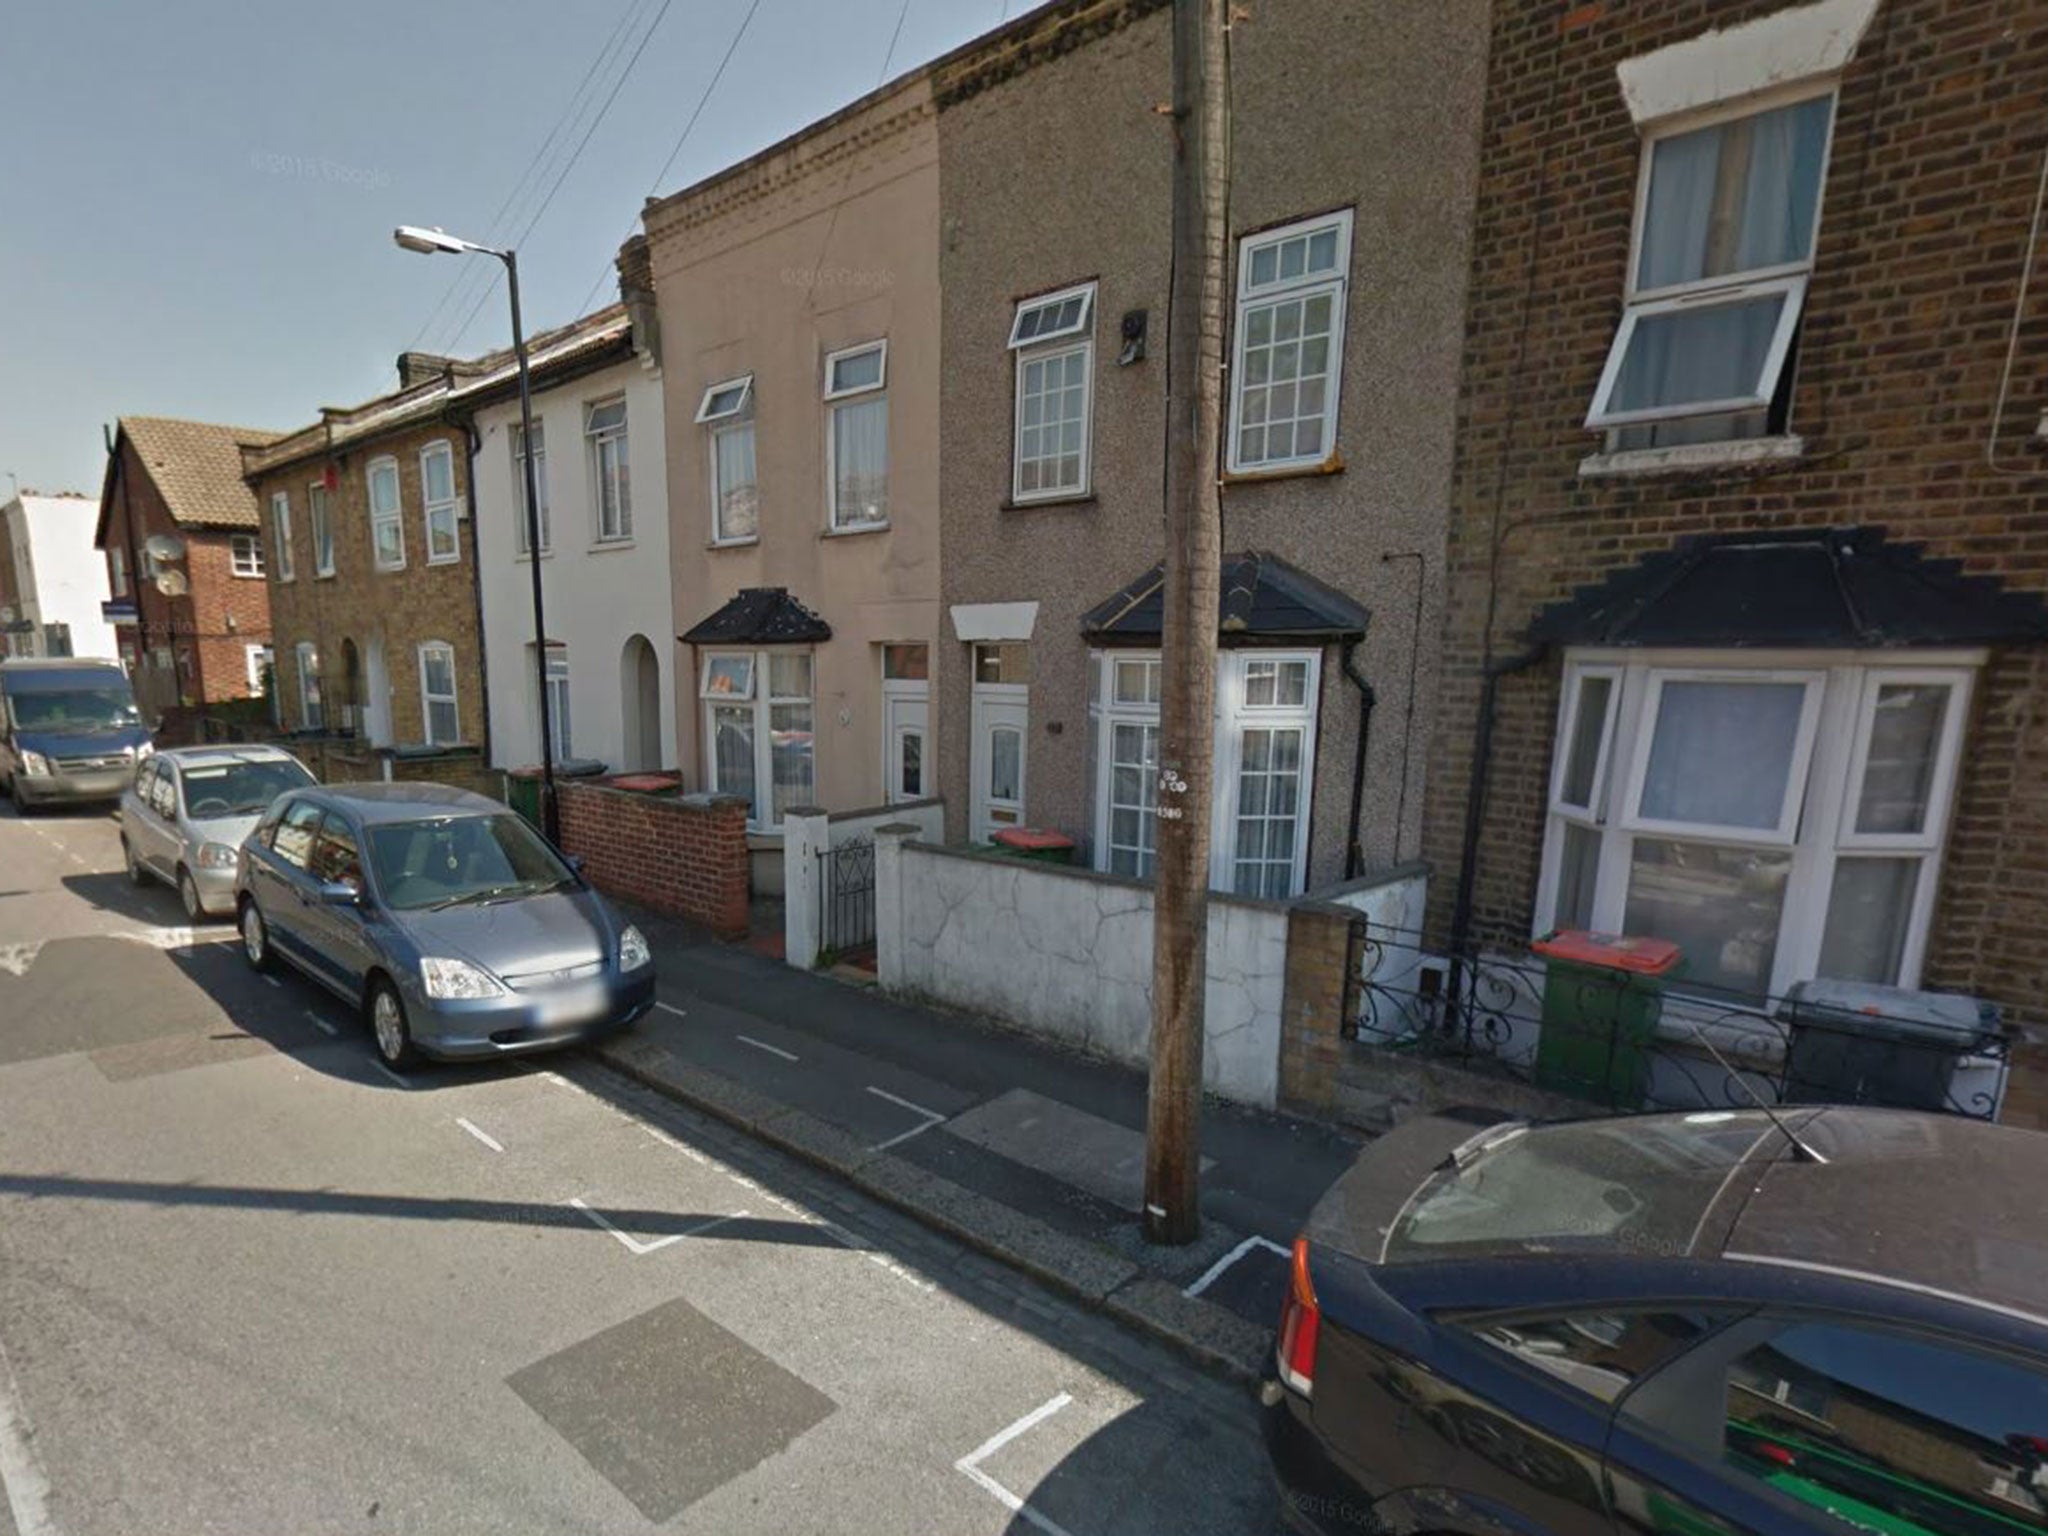 Police were called to a house fire in Field Road, east London, on Christmas Day, where a 60-year-old man was pronounced dead at the scene